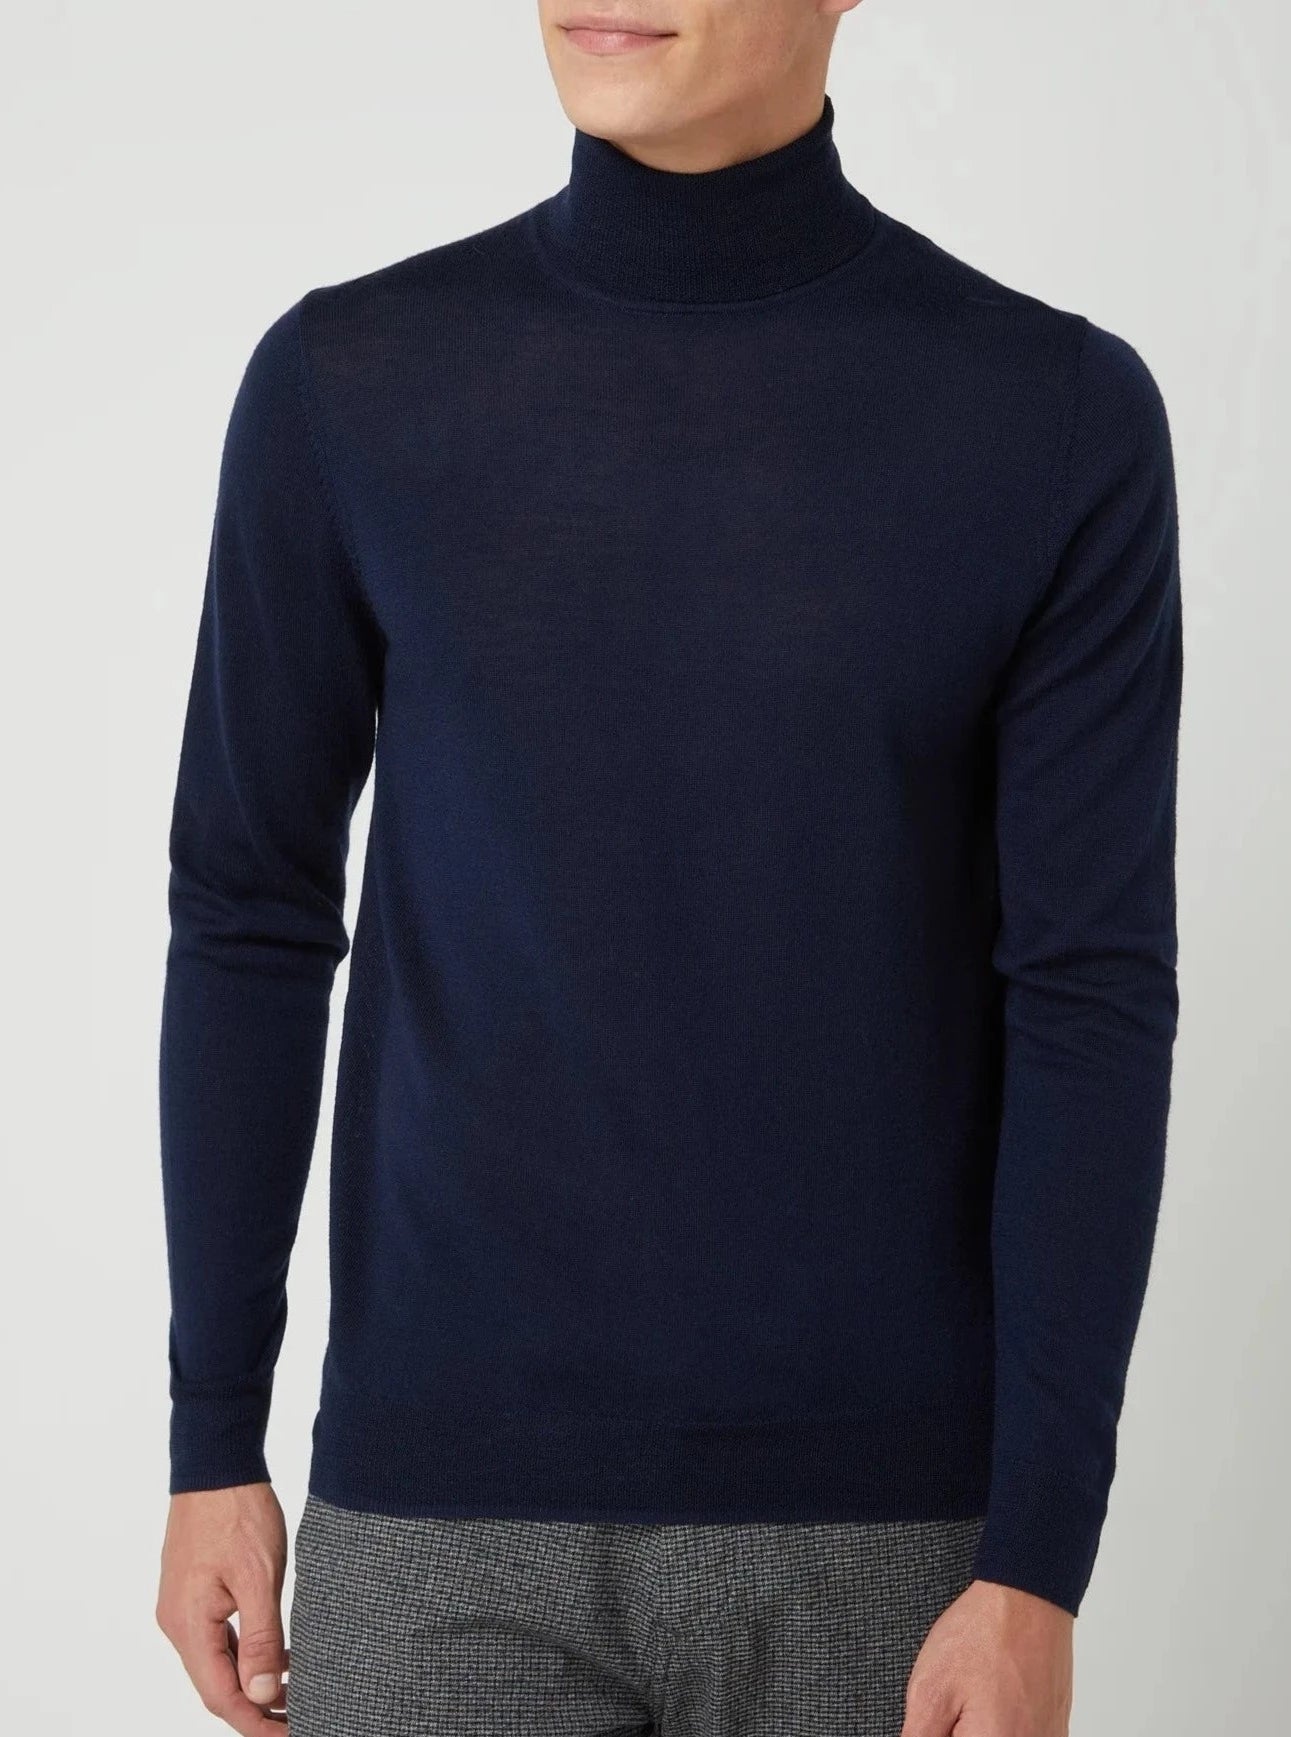 turtle neck wool sweater for men